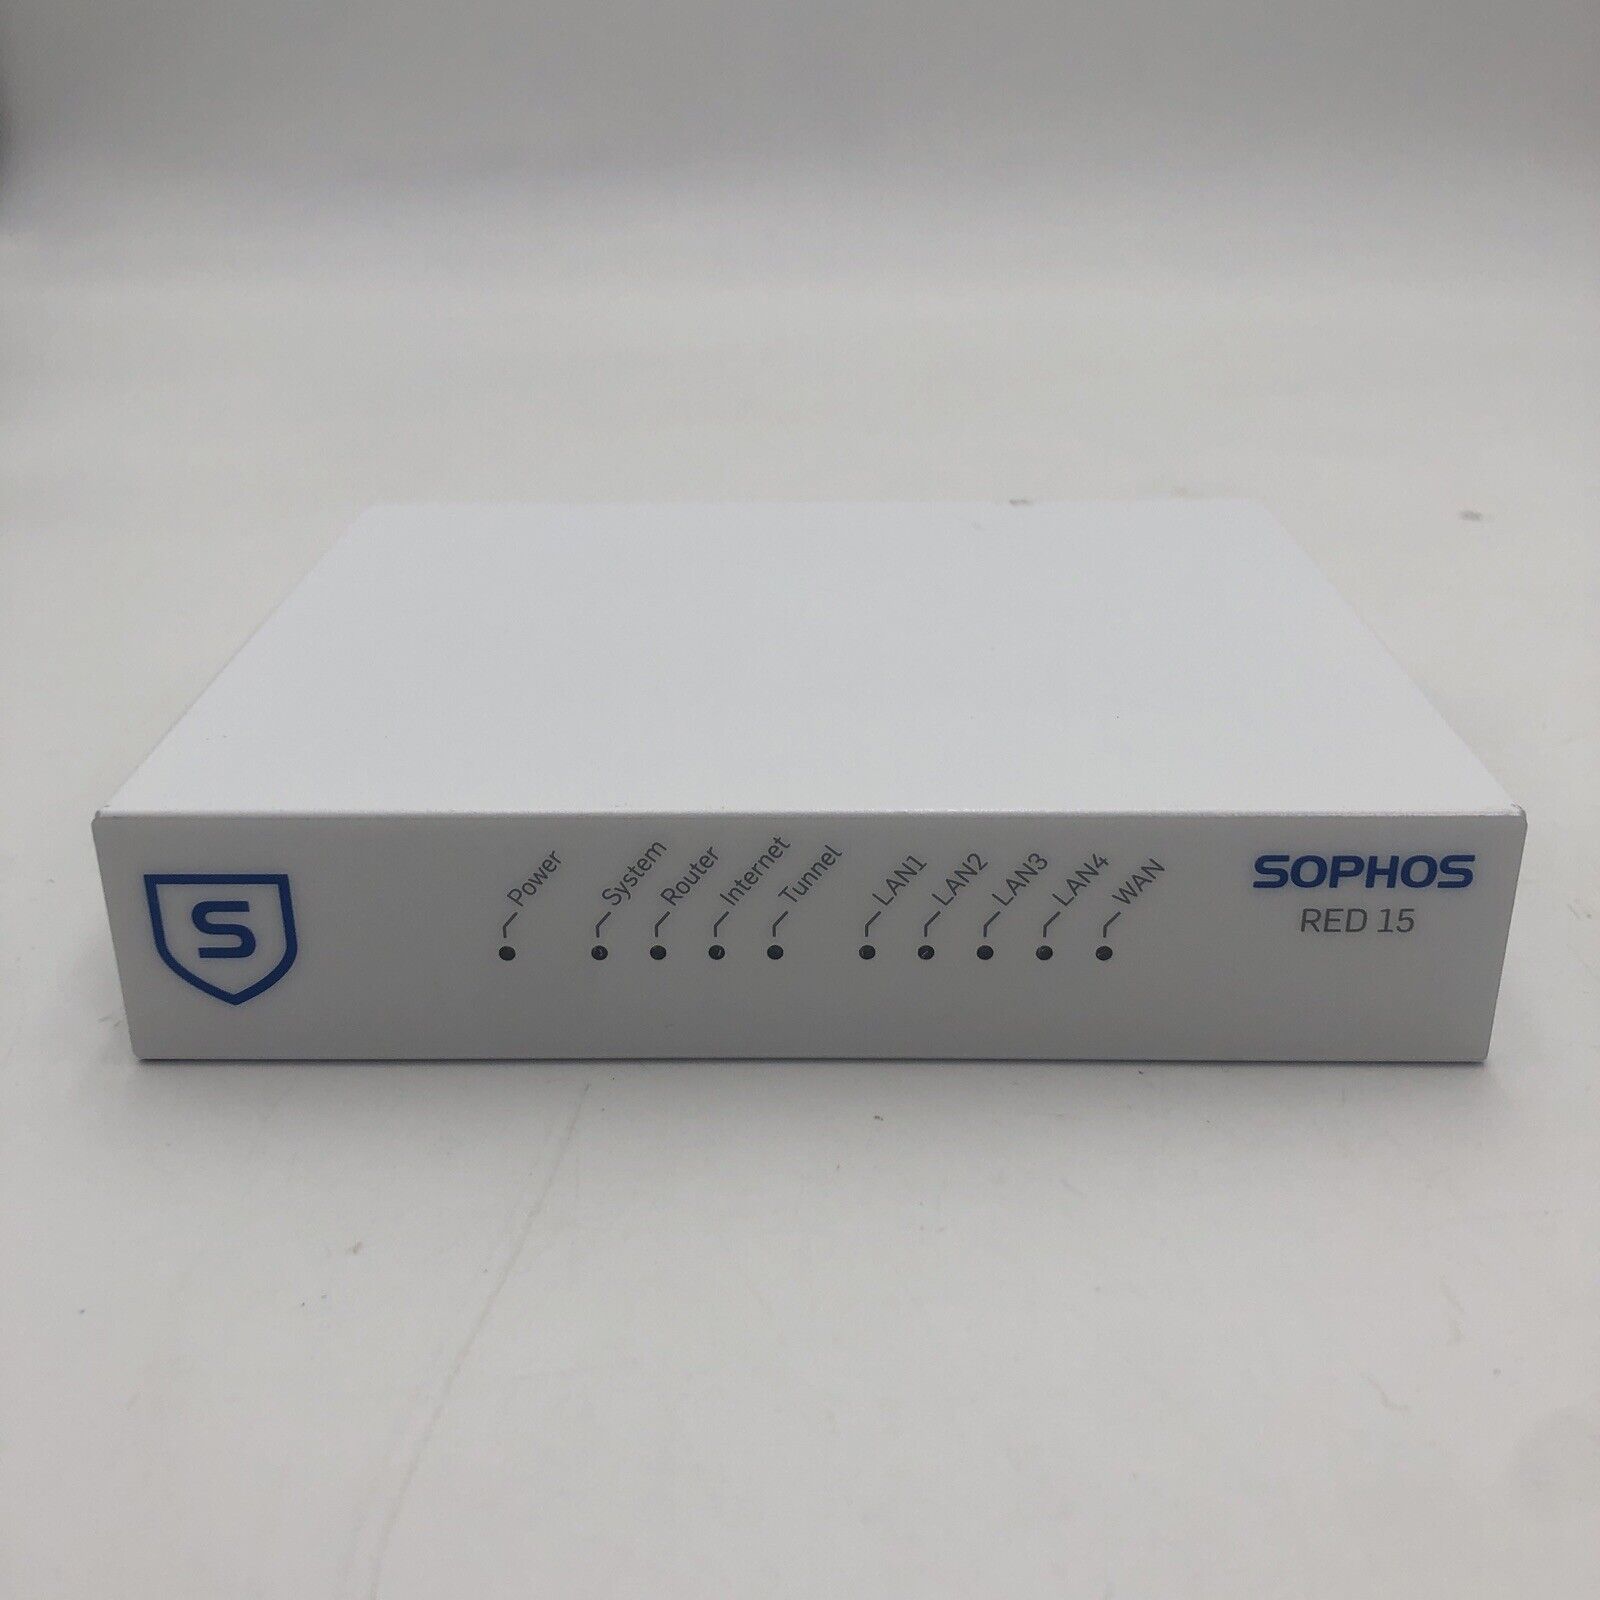 Used Sophos RED 15 Rev.1 Firewall With Power Adapter. READ A